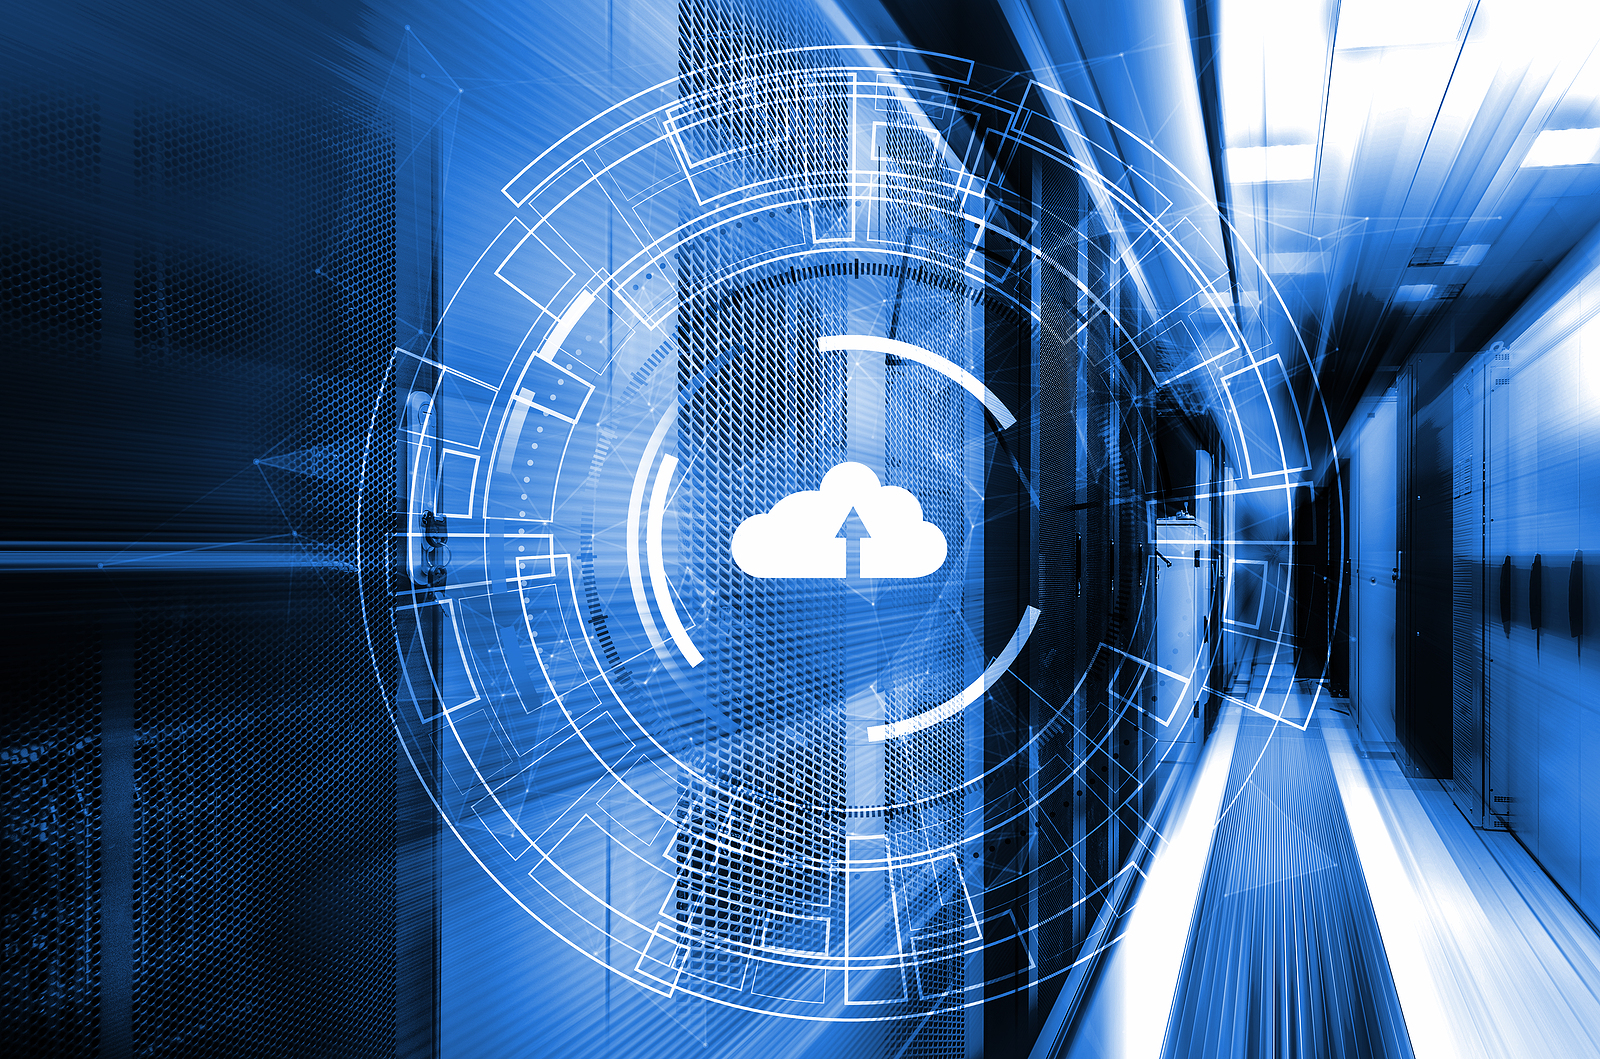 Cloud Integration Services Emerge as Partner Opportunity